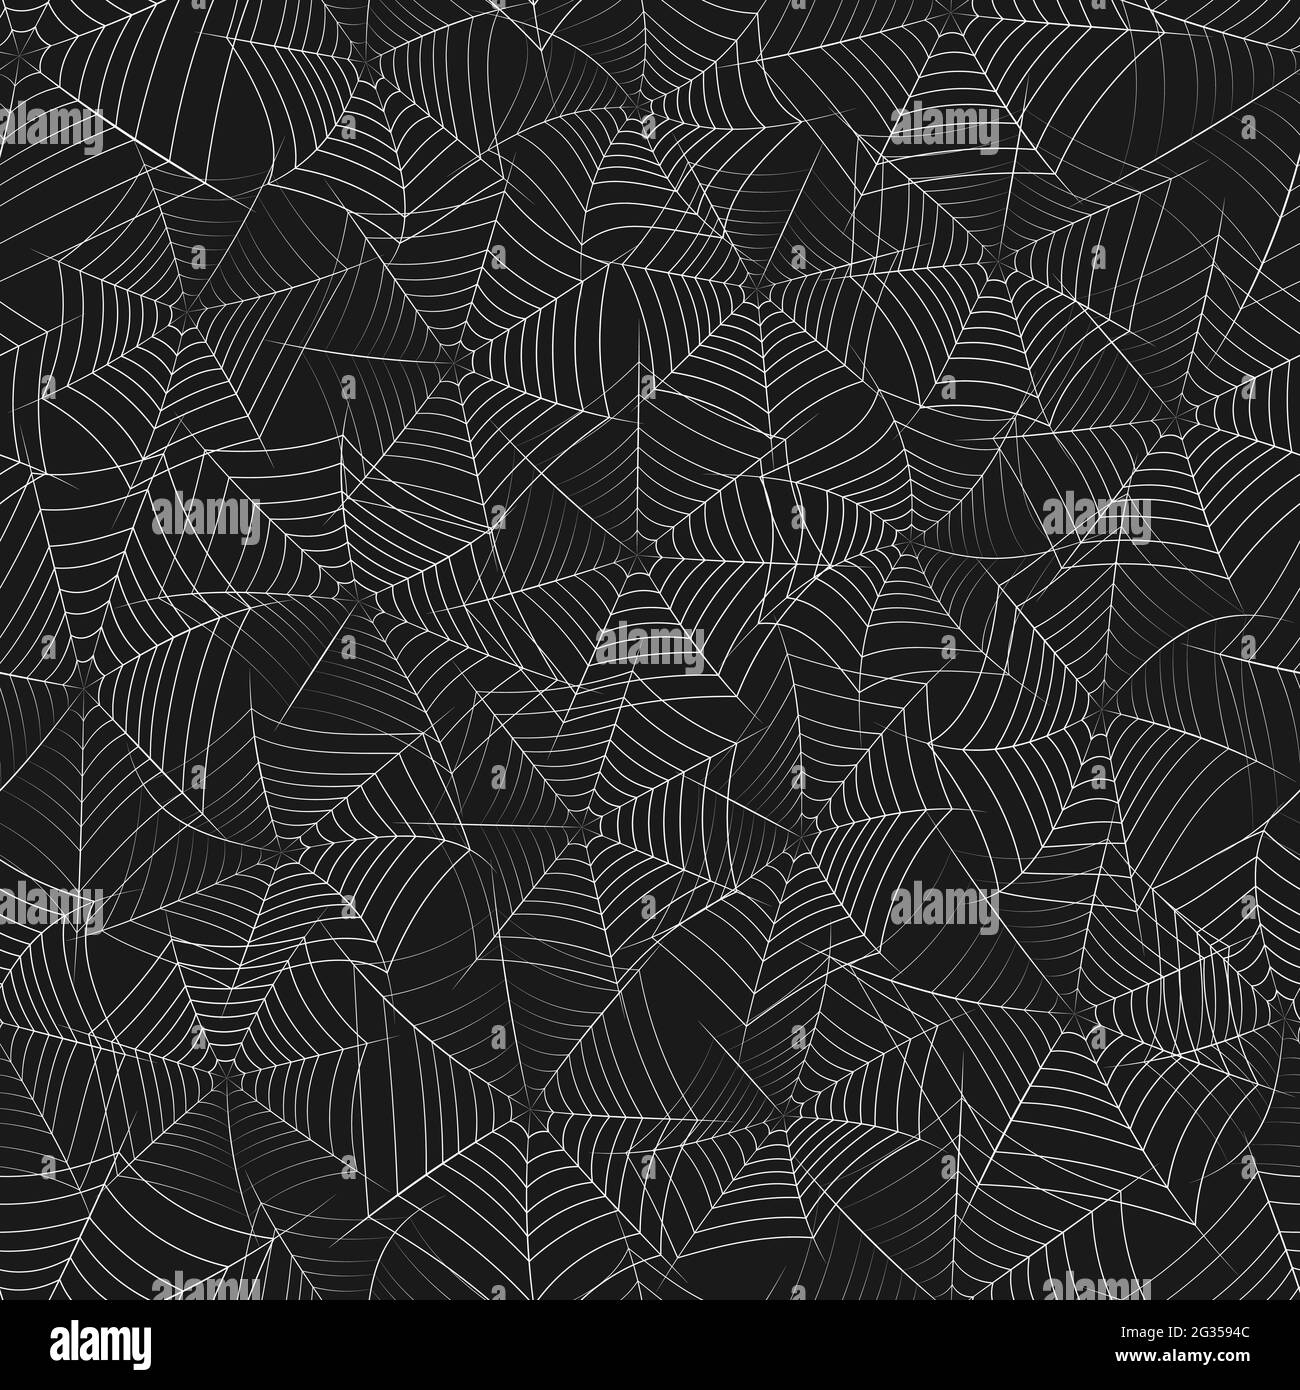 Vector seamless texture with grayscale spider web on a black background. Stock Vector